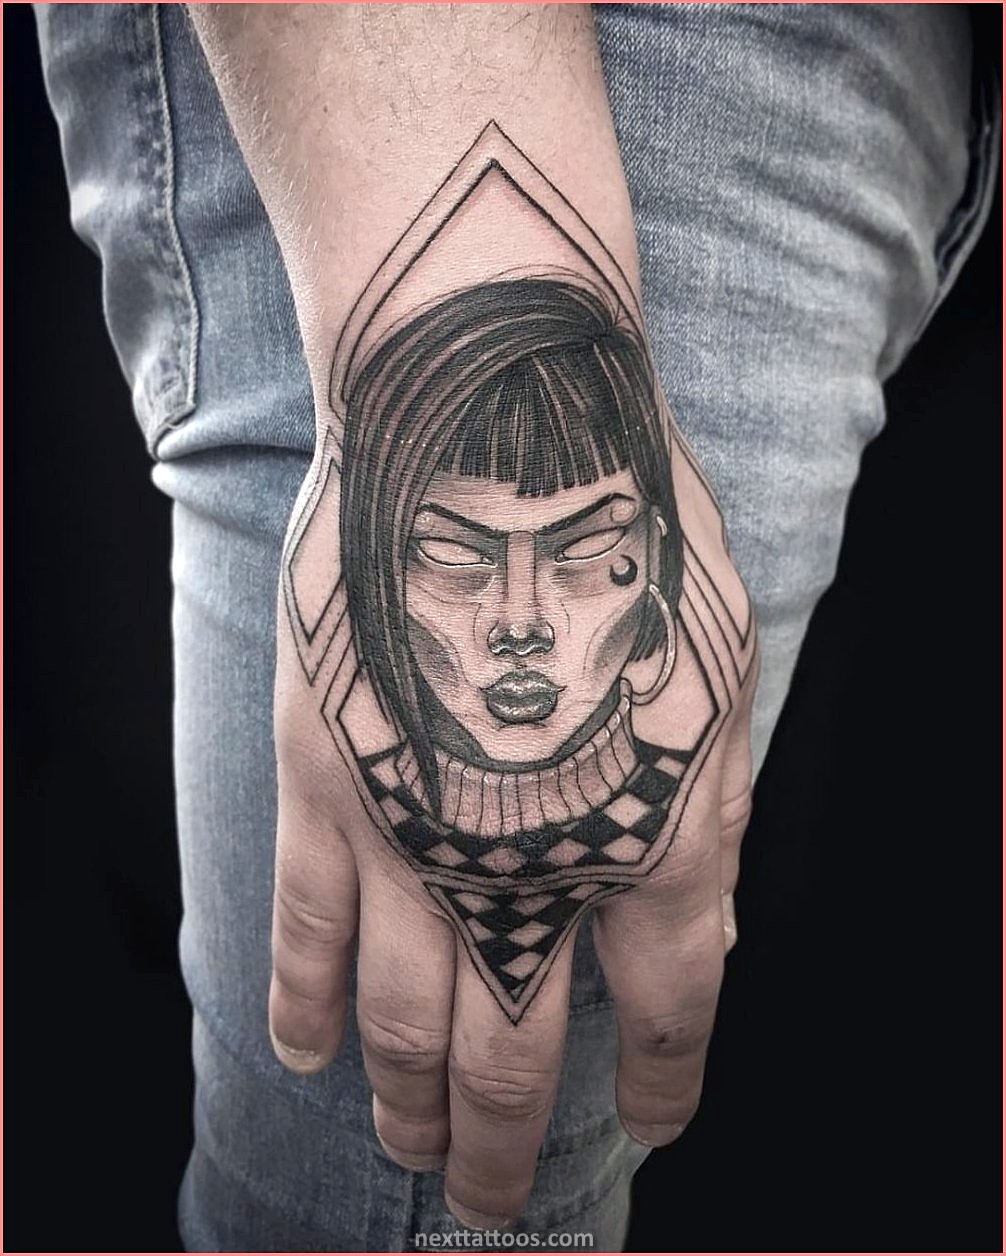 Hand Tattoos For Women - 5 Things to Consider Before Getting a Hand Tattoo